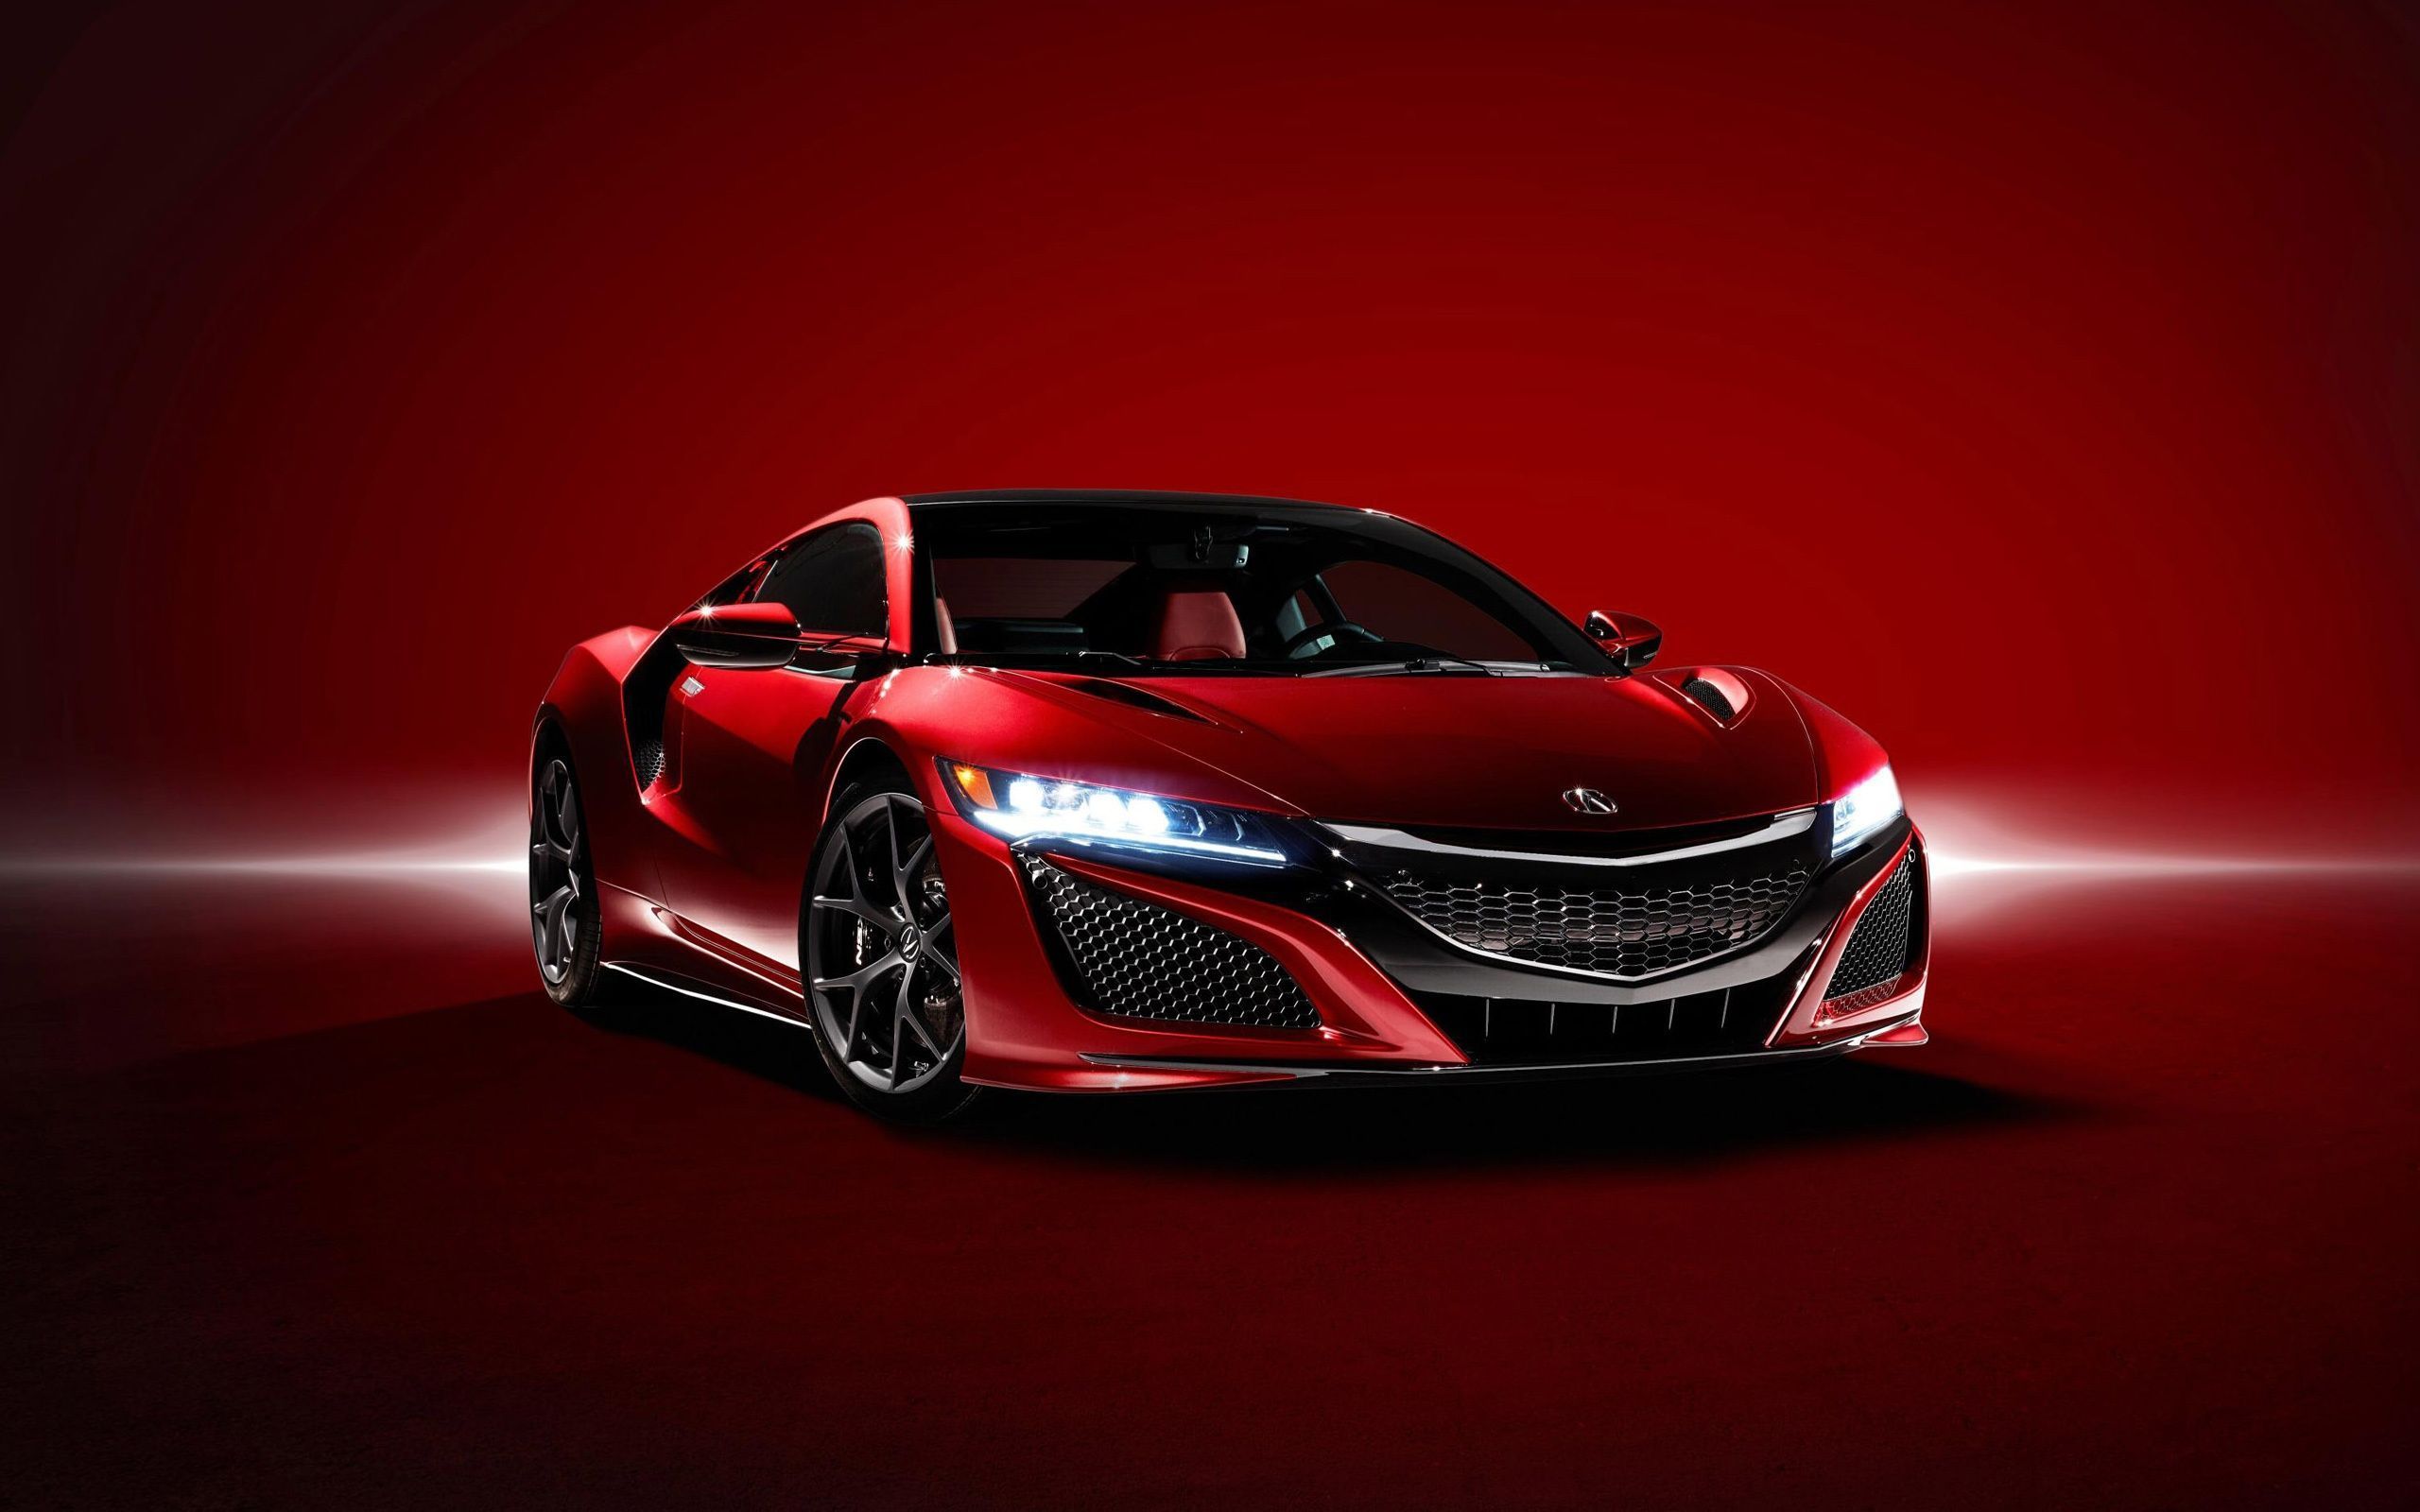 Red Car Wallpapers  Top 25 Best Red Car Wallpapers  HQ 